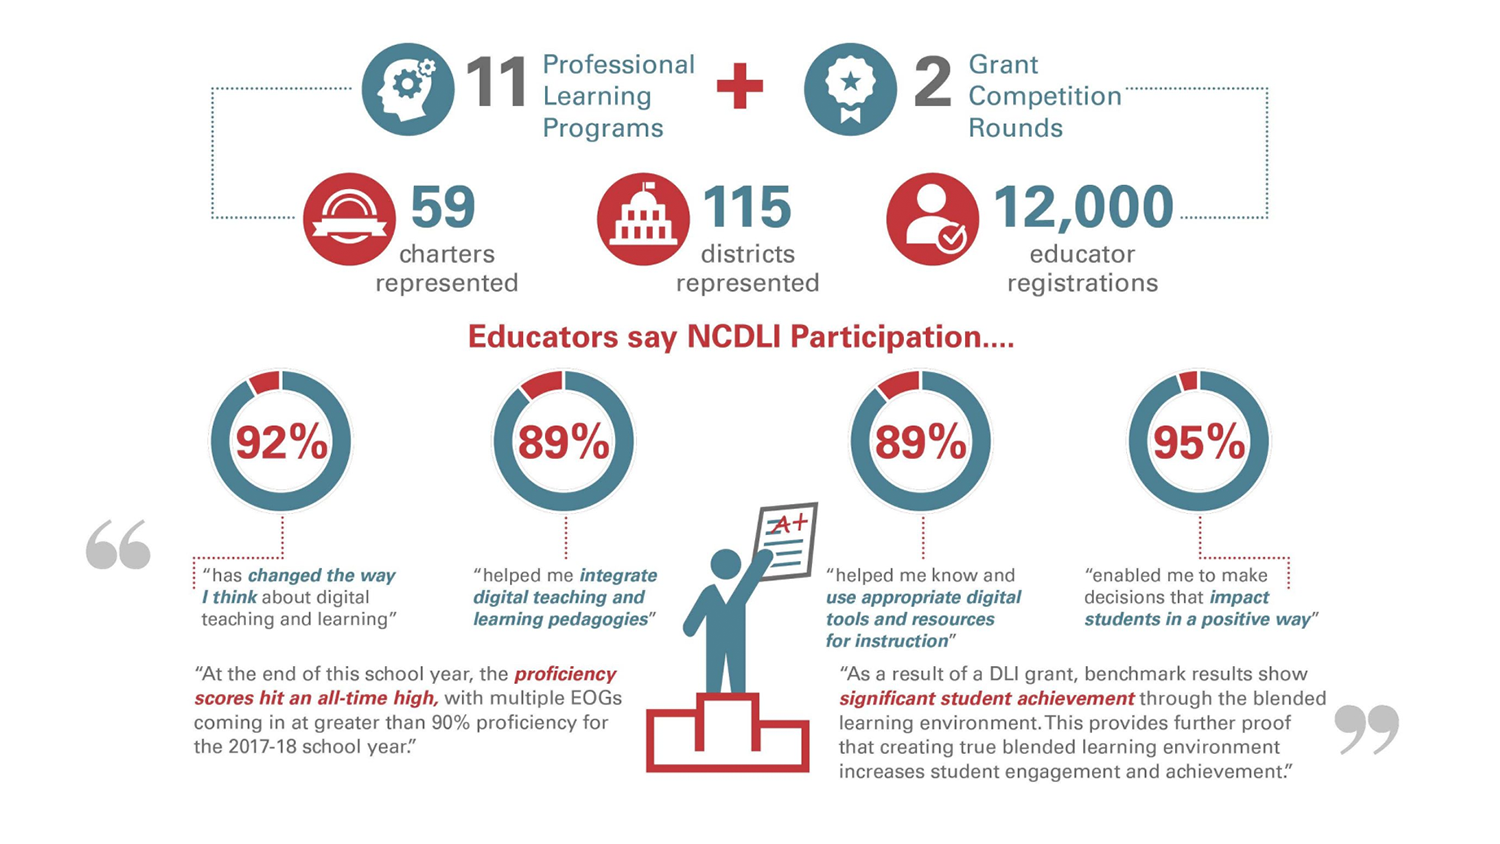 The collective impacts of NCDLI efforts on teaching and learning